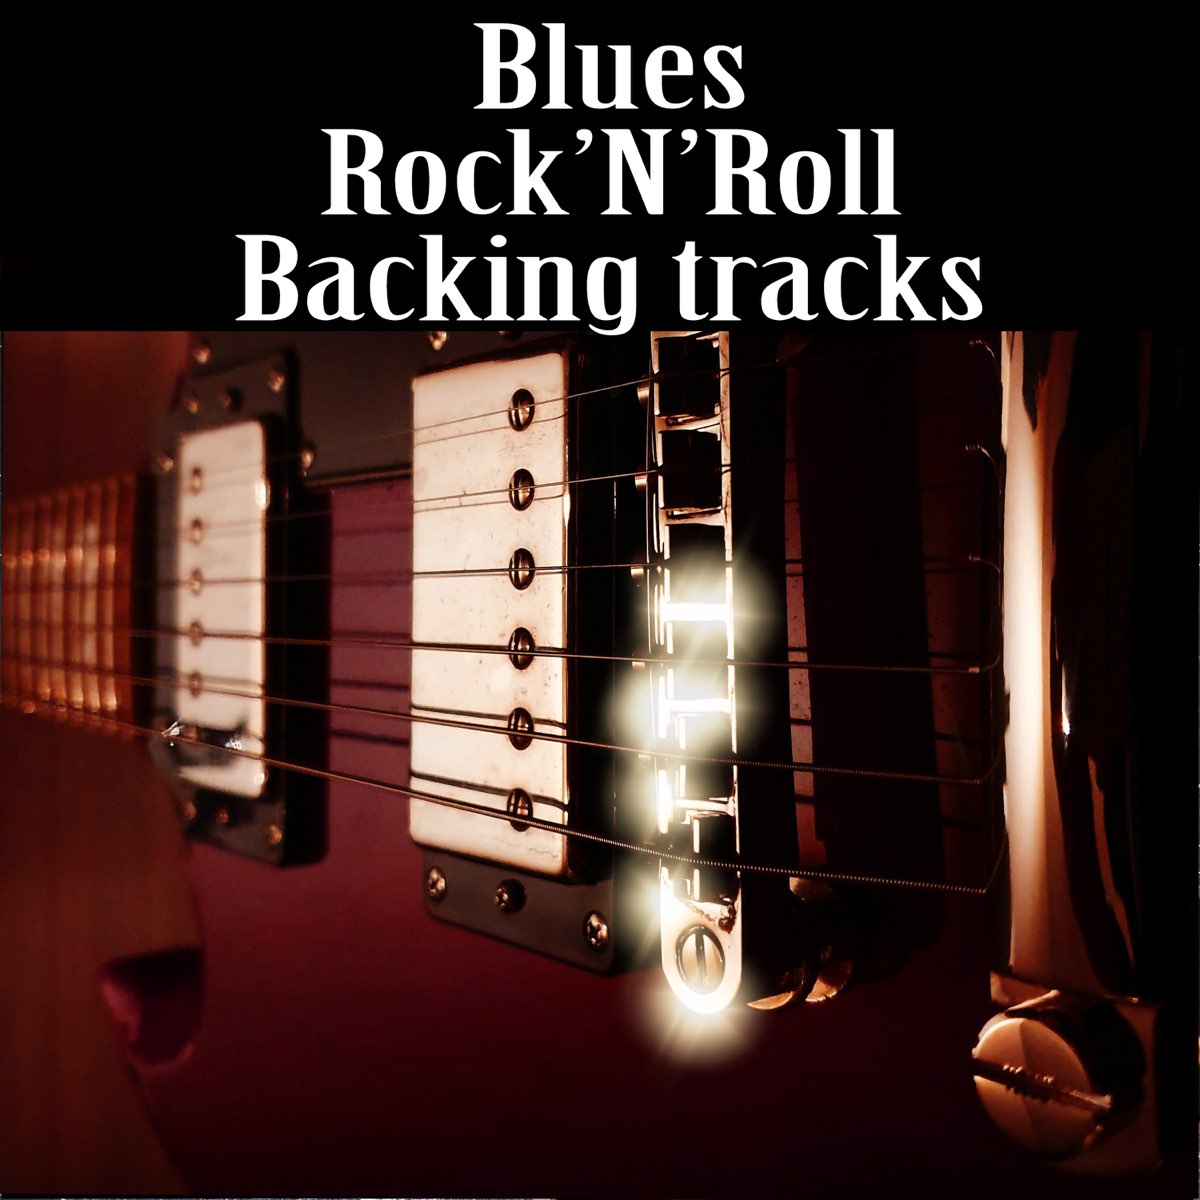 Blues Rock'n Roll Guitar Backing Tracks in all 12 keys by Guitar Backing  Tracks on Apple Music